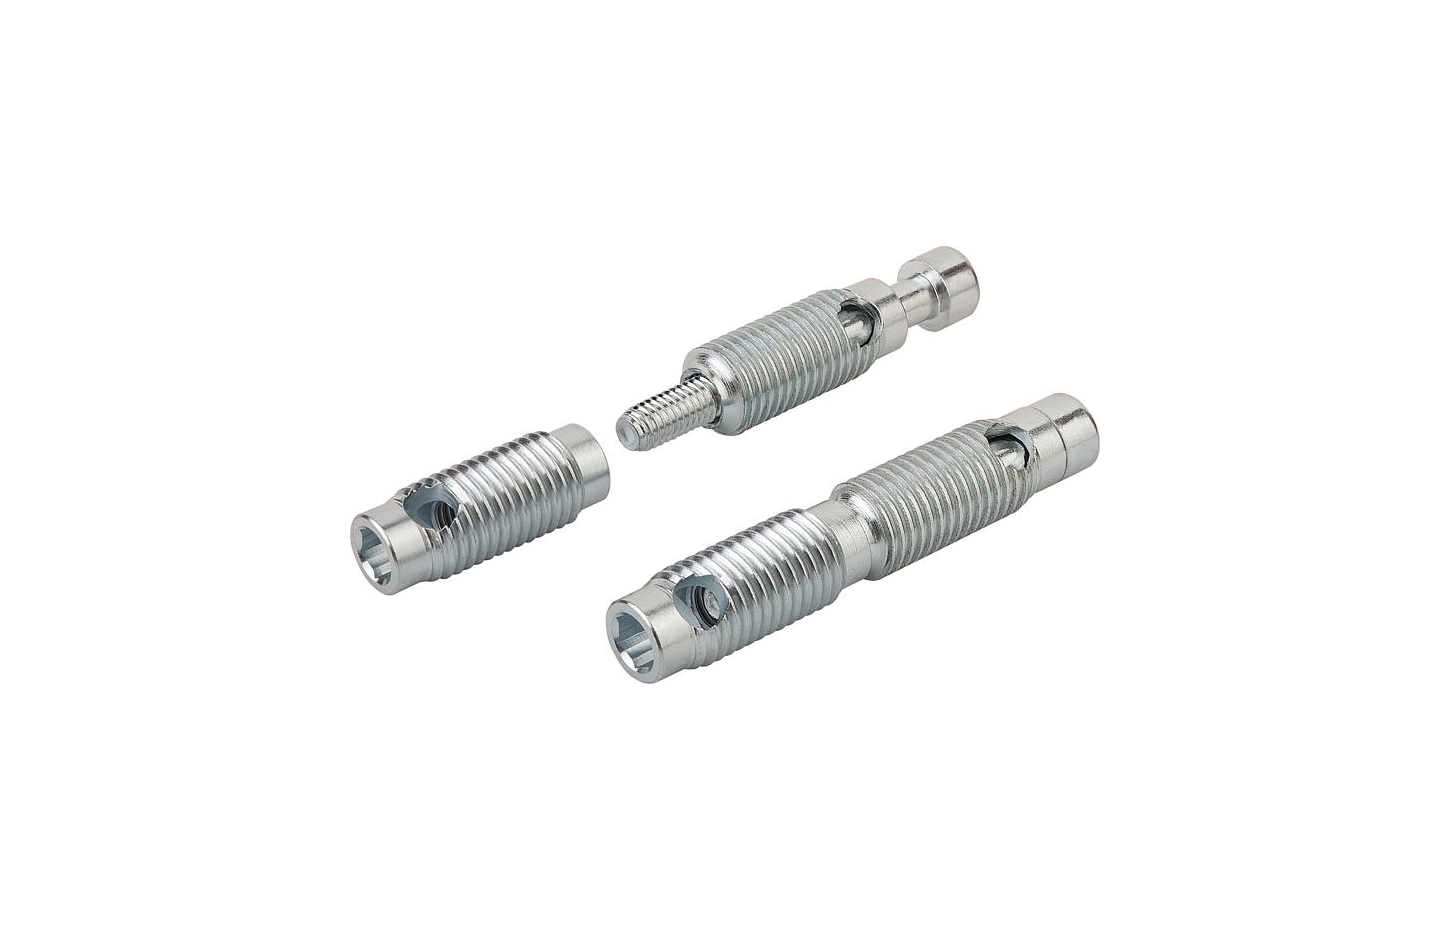 K1041 Butt connector sets automatic Type I